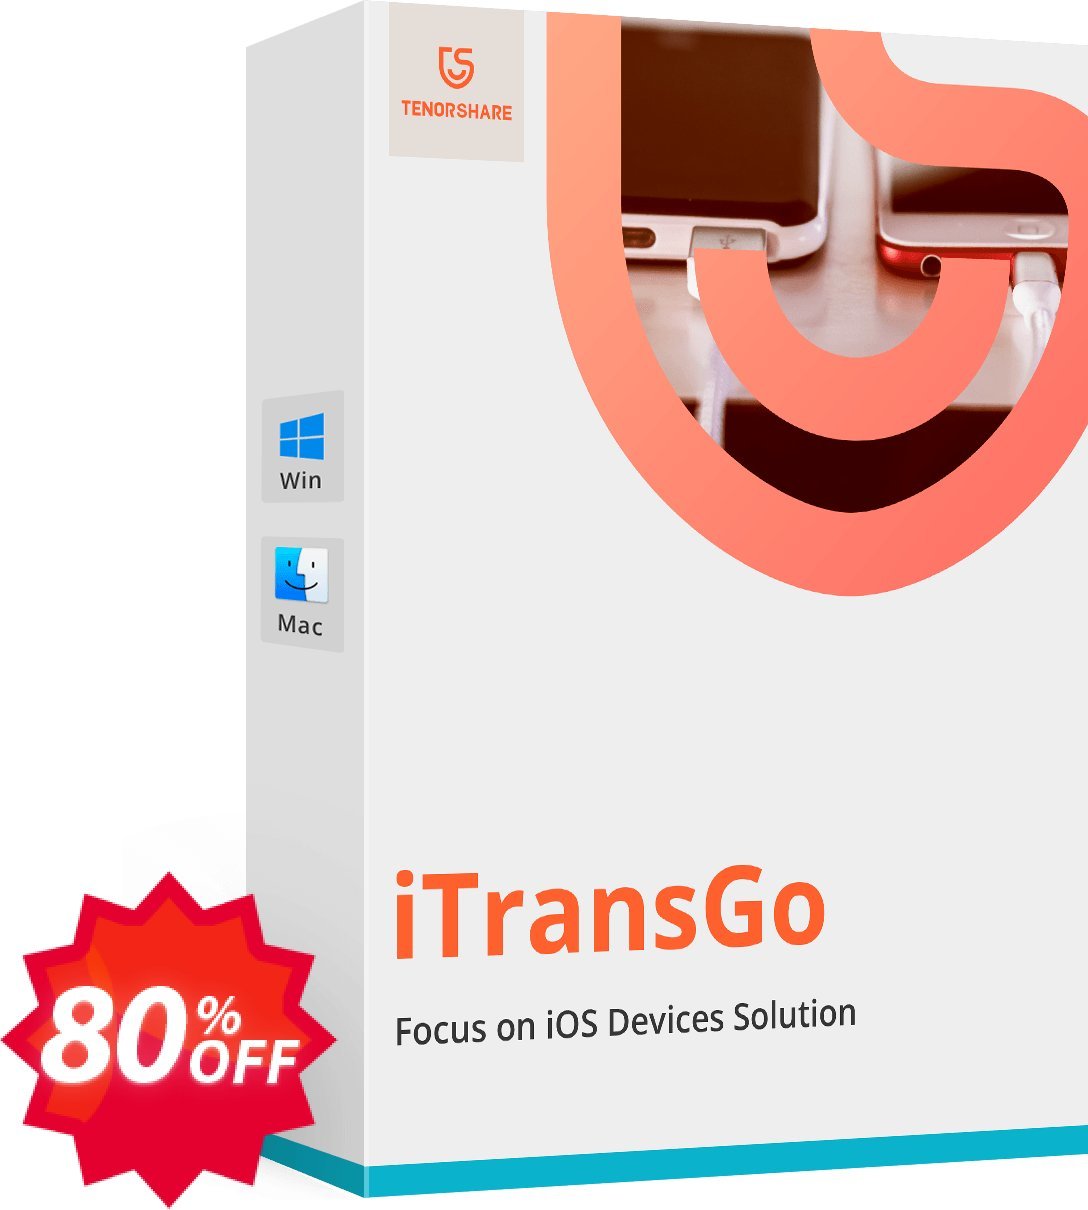 Tenorshare iTransGo, Yearly Plan  Coupon code 80% discount 